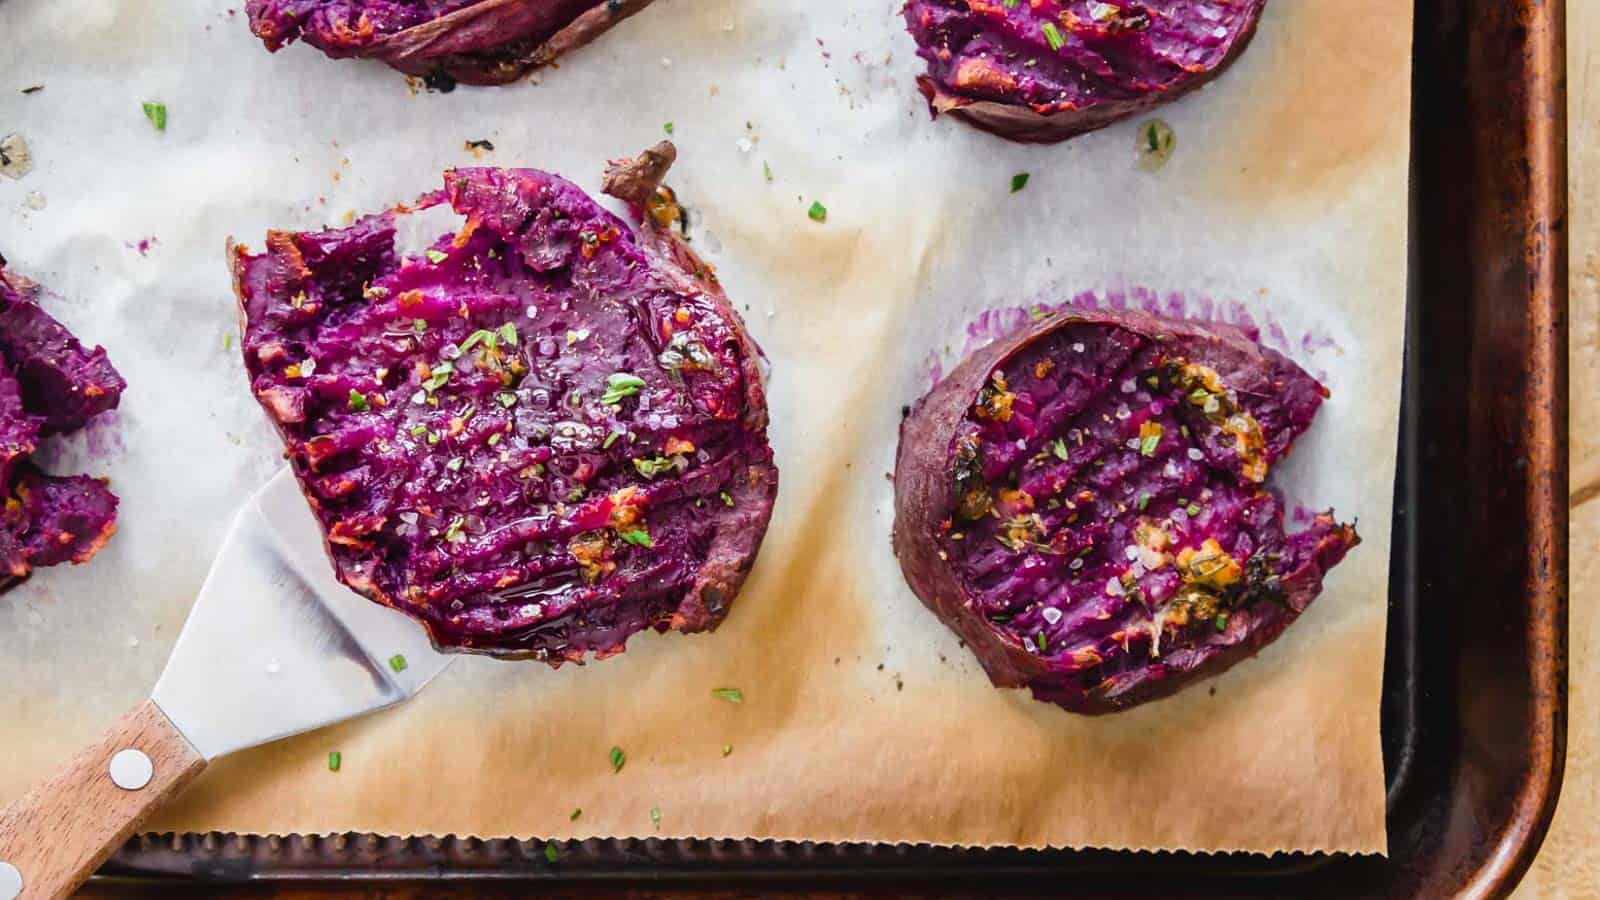 Smashed roasted purple sweet potatoes on parchment paper lined baking sheet.